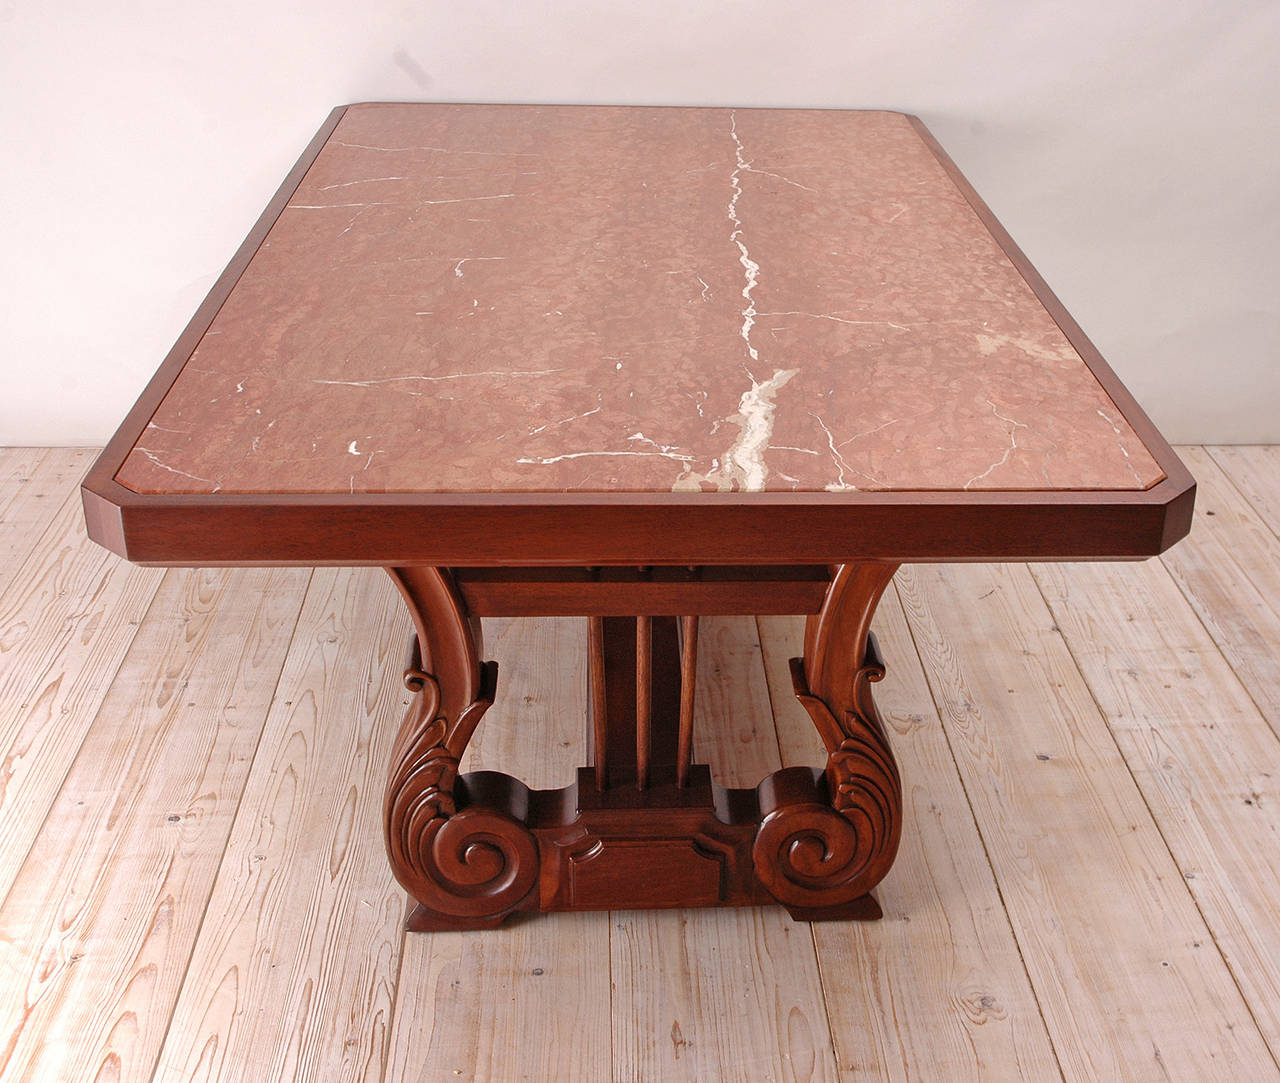 Carved Honduran mahogany table with trestle base composed of two lyres embellished with acanthus leaves and joined by a stretcher, with inset Rosso Alicante marble top. French polish finish. Custom-built in the early 1970s.

Measures: 75